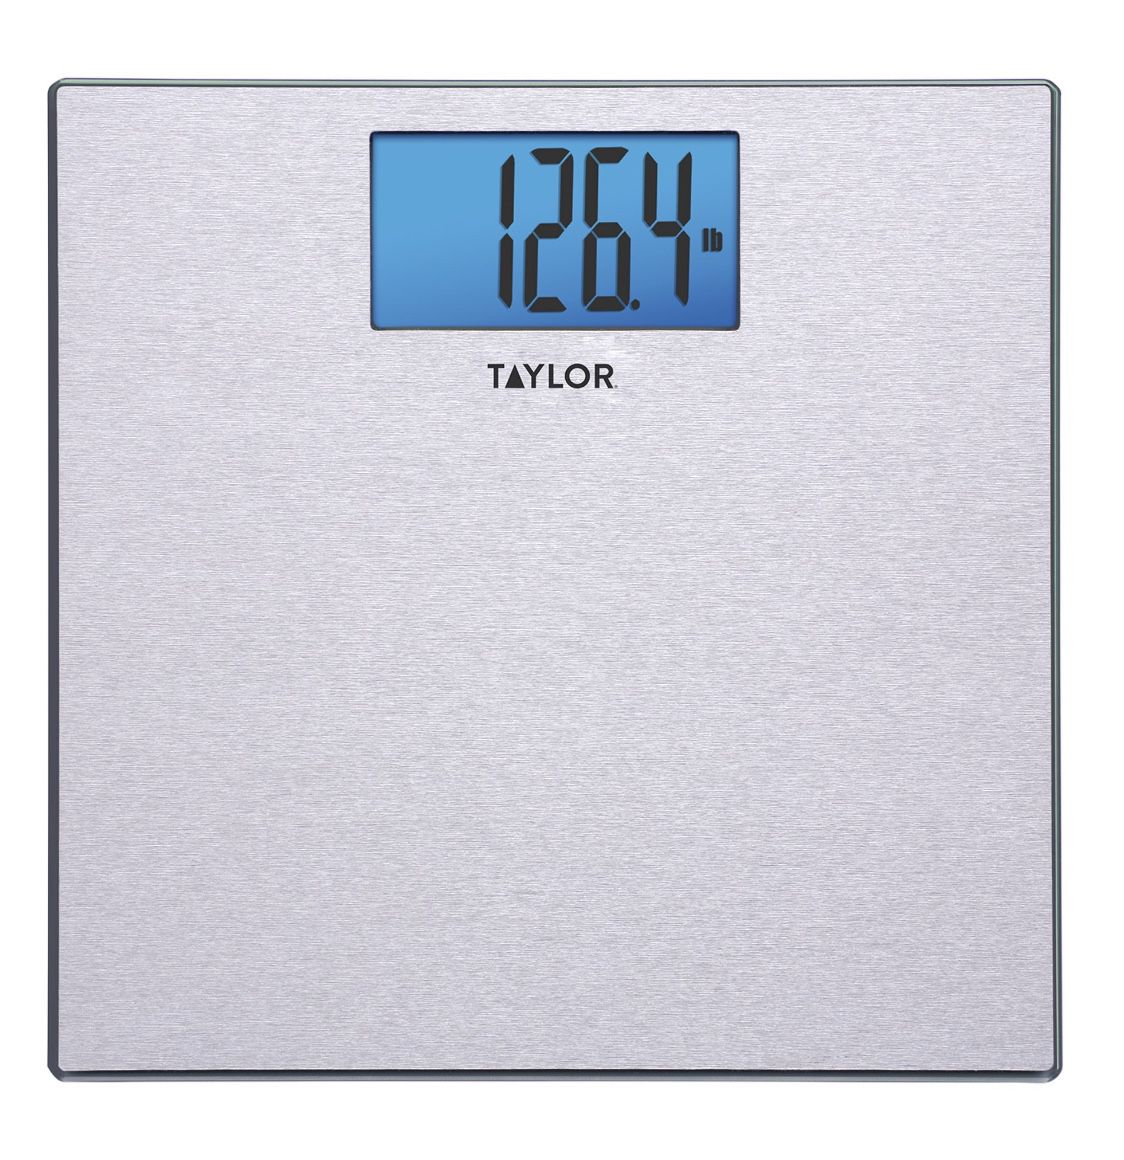 Taylor Brushed Metal Scale